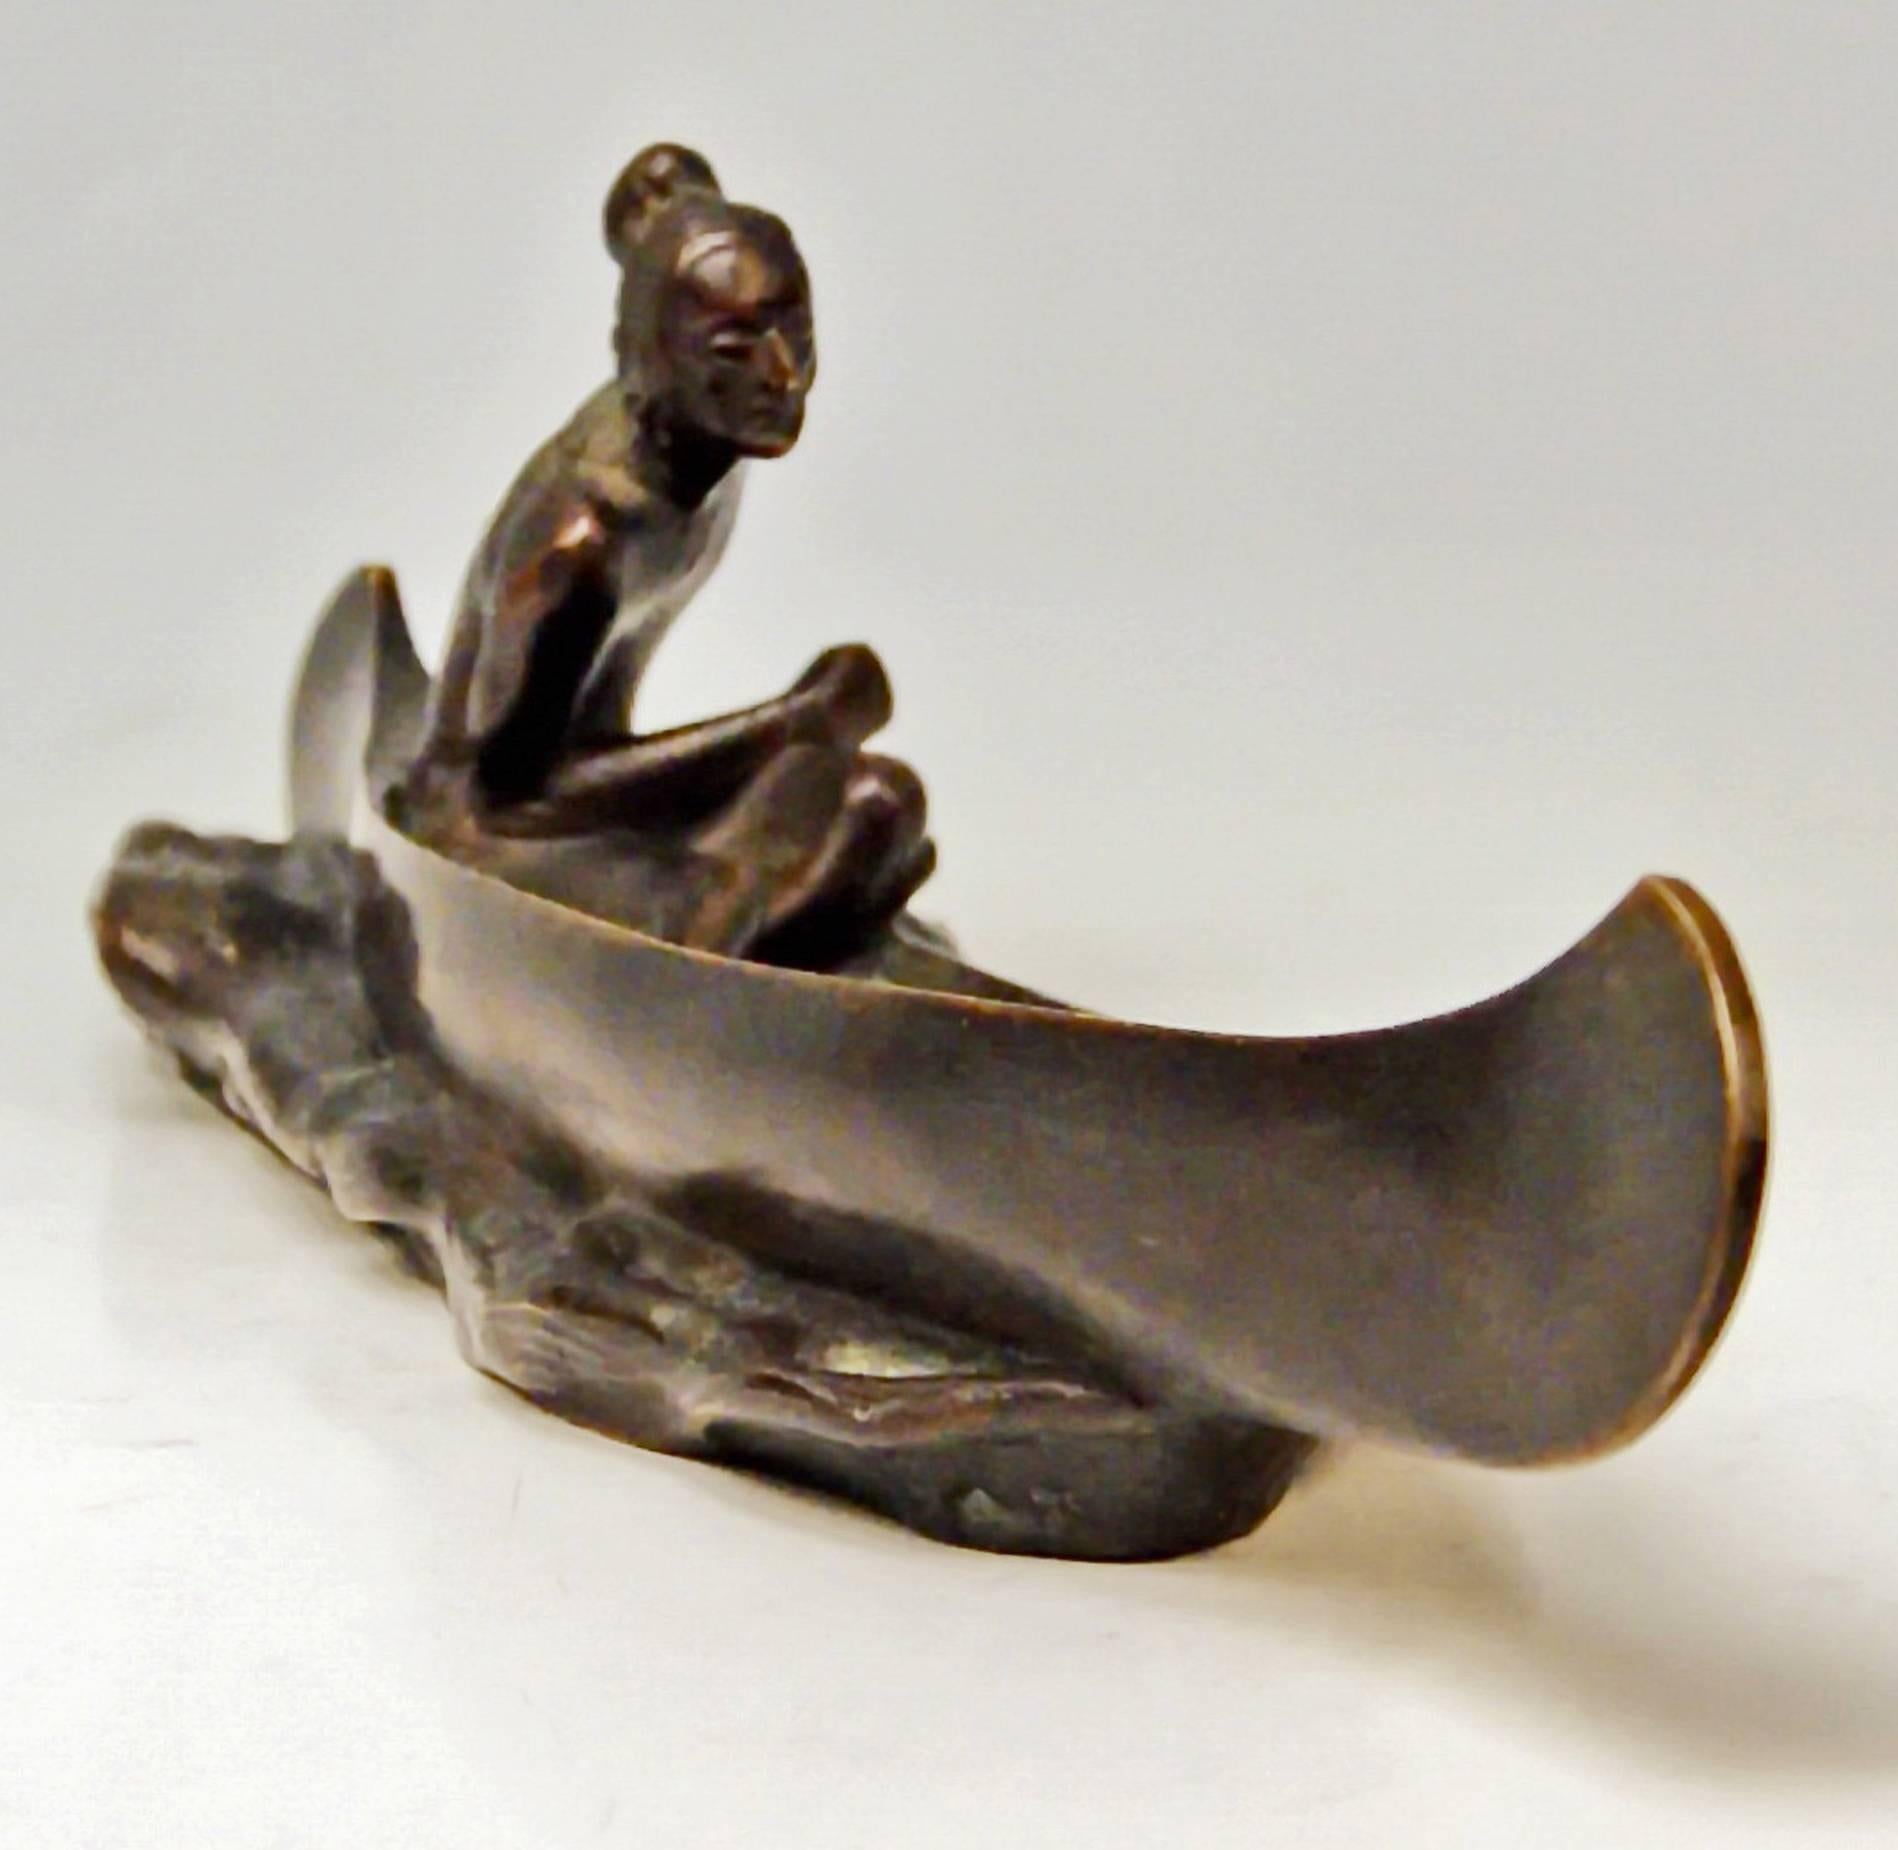 Gorgeous Vienna Bronze figurine created by famous bronze sculptor Carl Kauba (1865-1922) / made circa 1920. Style Native American.

There is aRed Indian having sat down in canoe boat visible, being busy with rowing: The man seems to make an effort